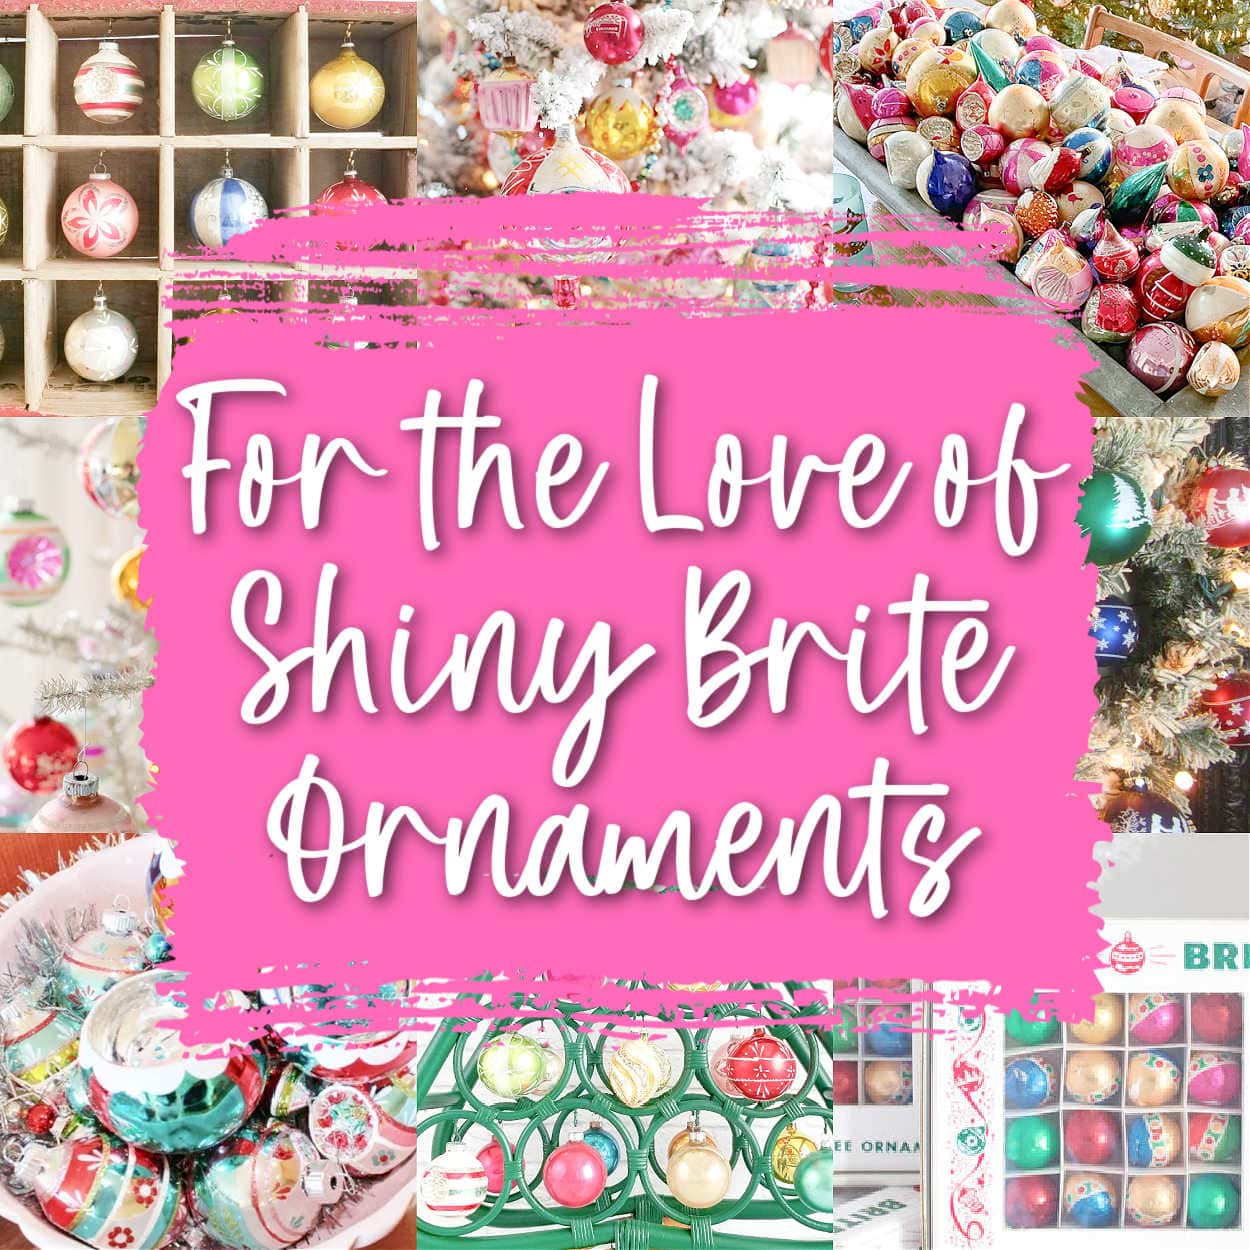 For the Love of Shiny Brite Ornaments